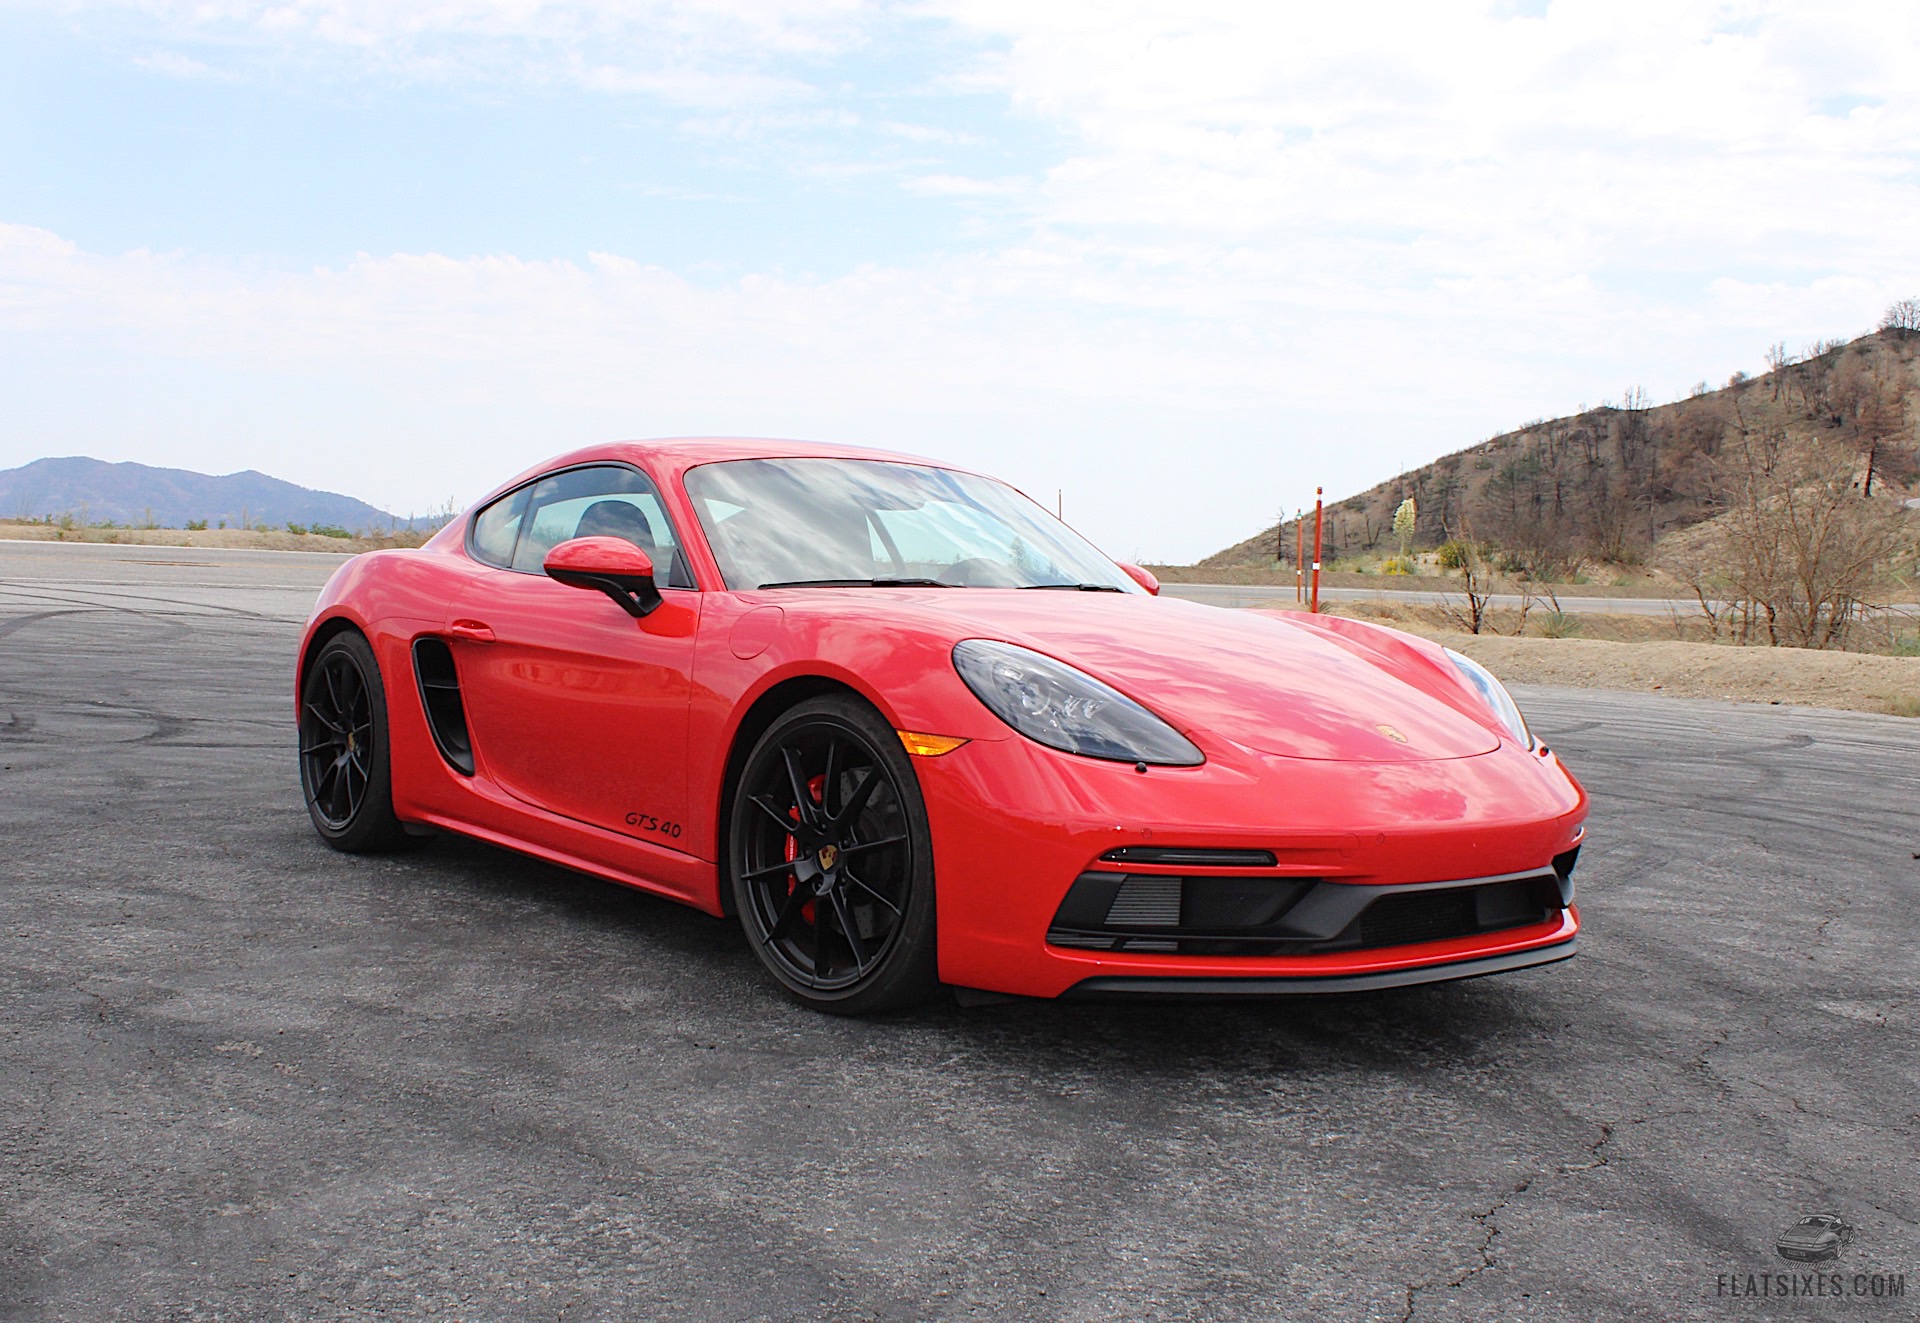 2021 Porsche 718 Cayman GTS 4.0 review: Nearly everything you'd